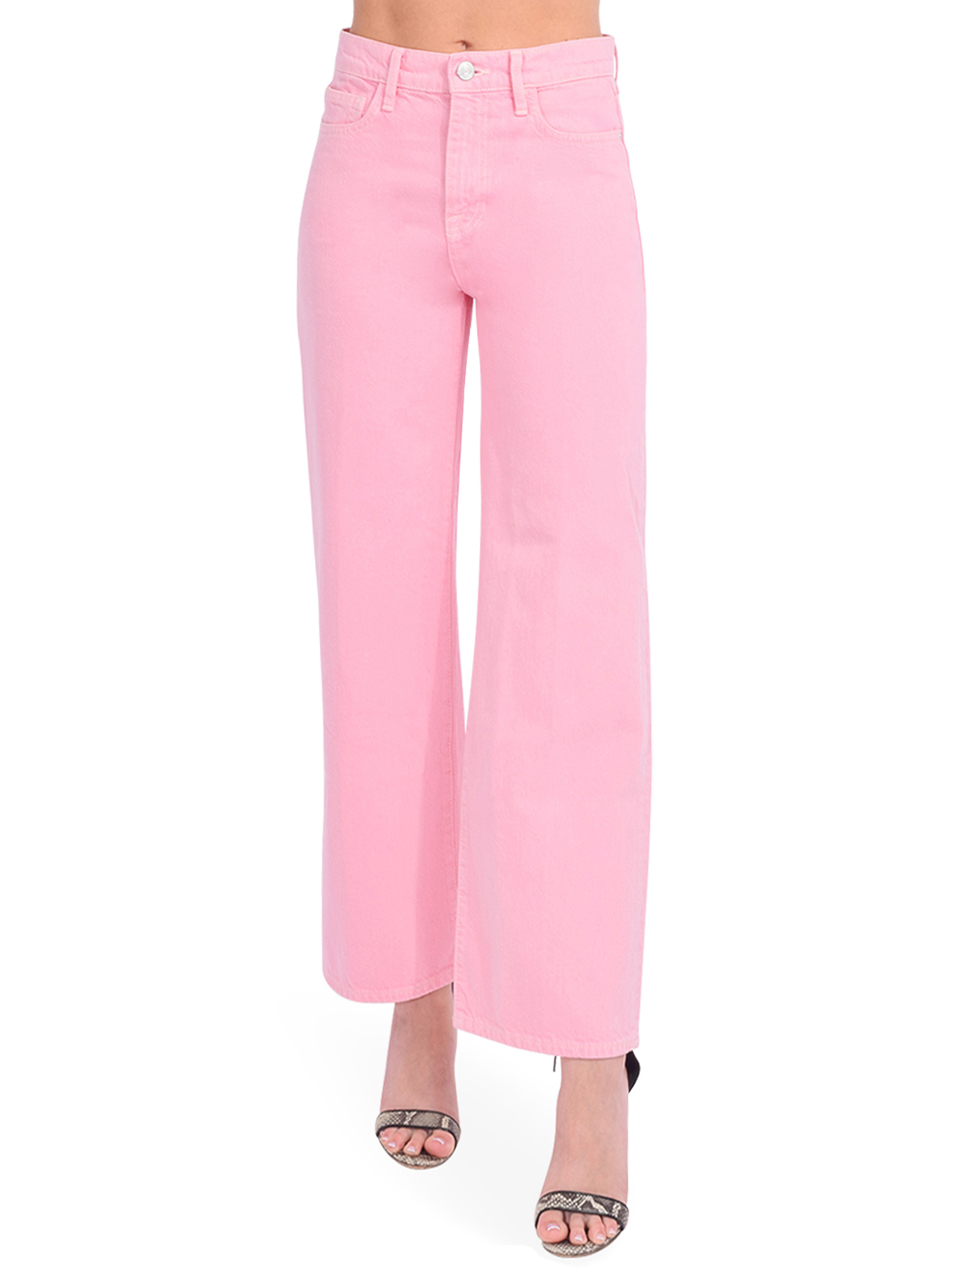 FRAME Le Jane Wide Leg Crop in Washed Dusty Pink Front View 